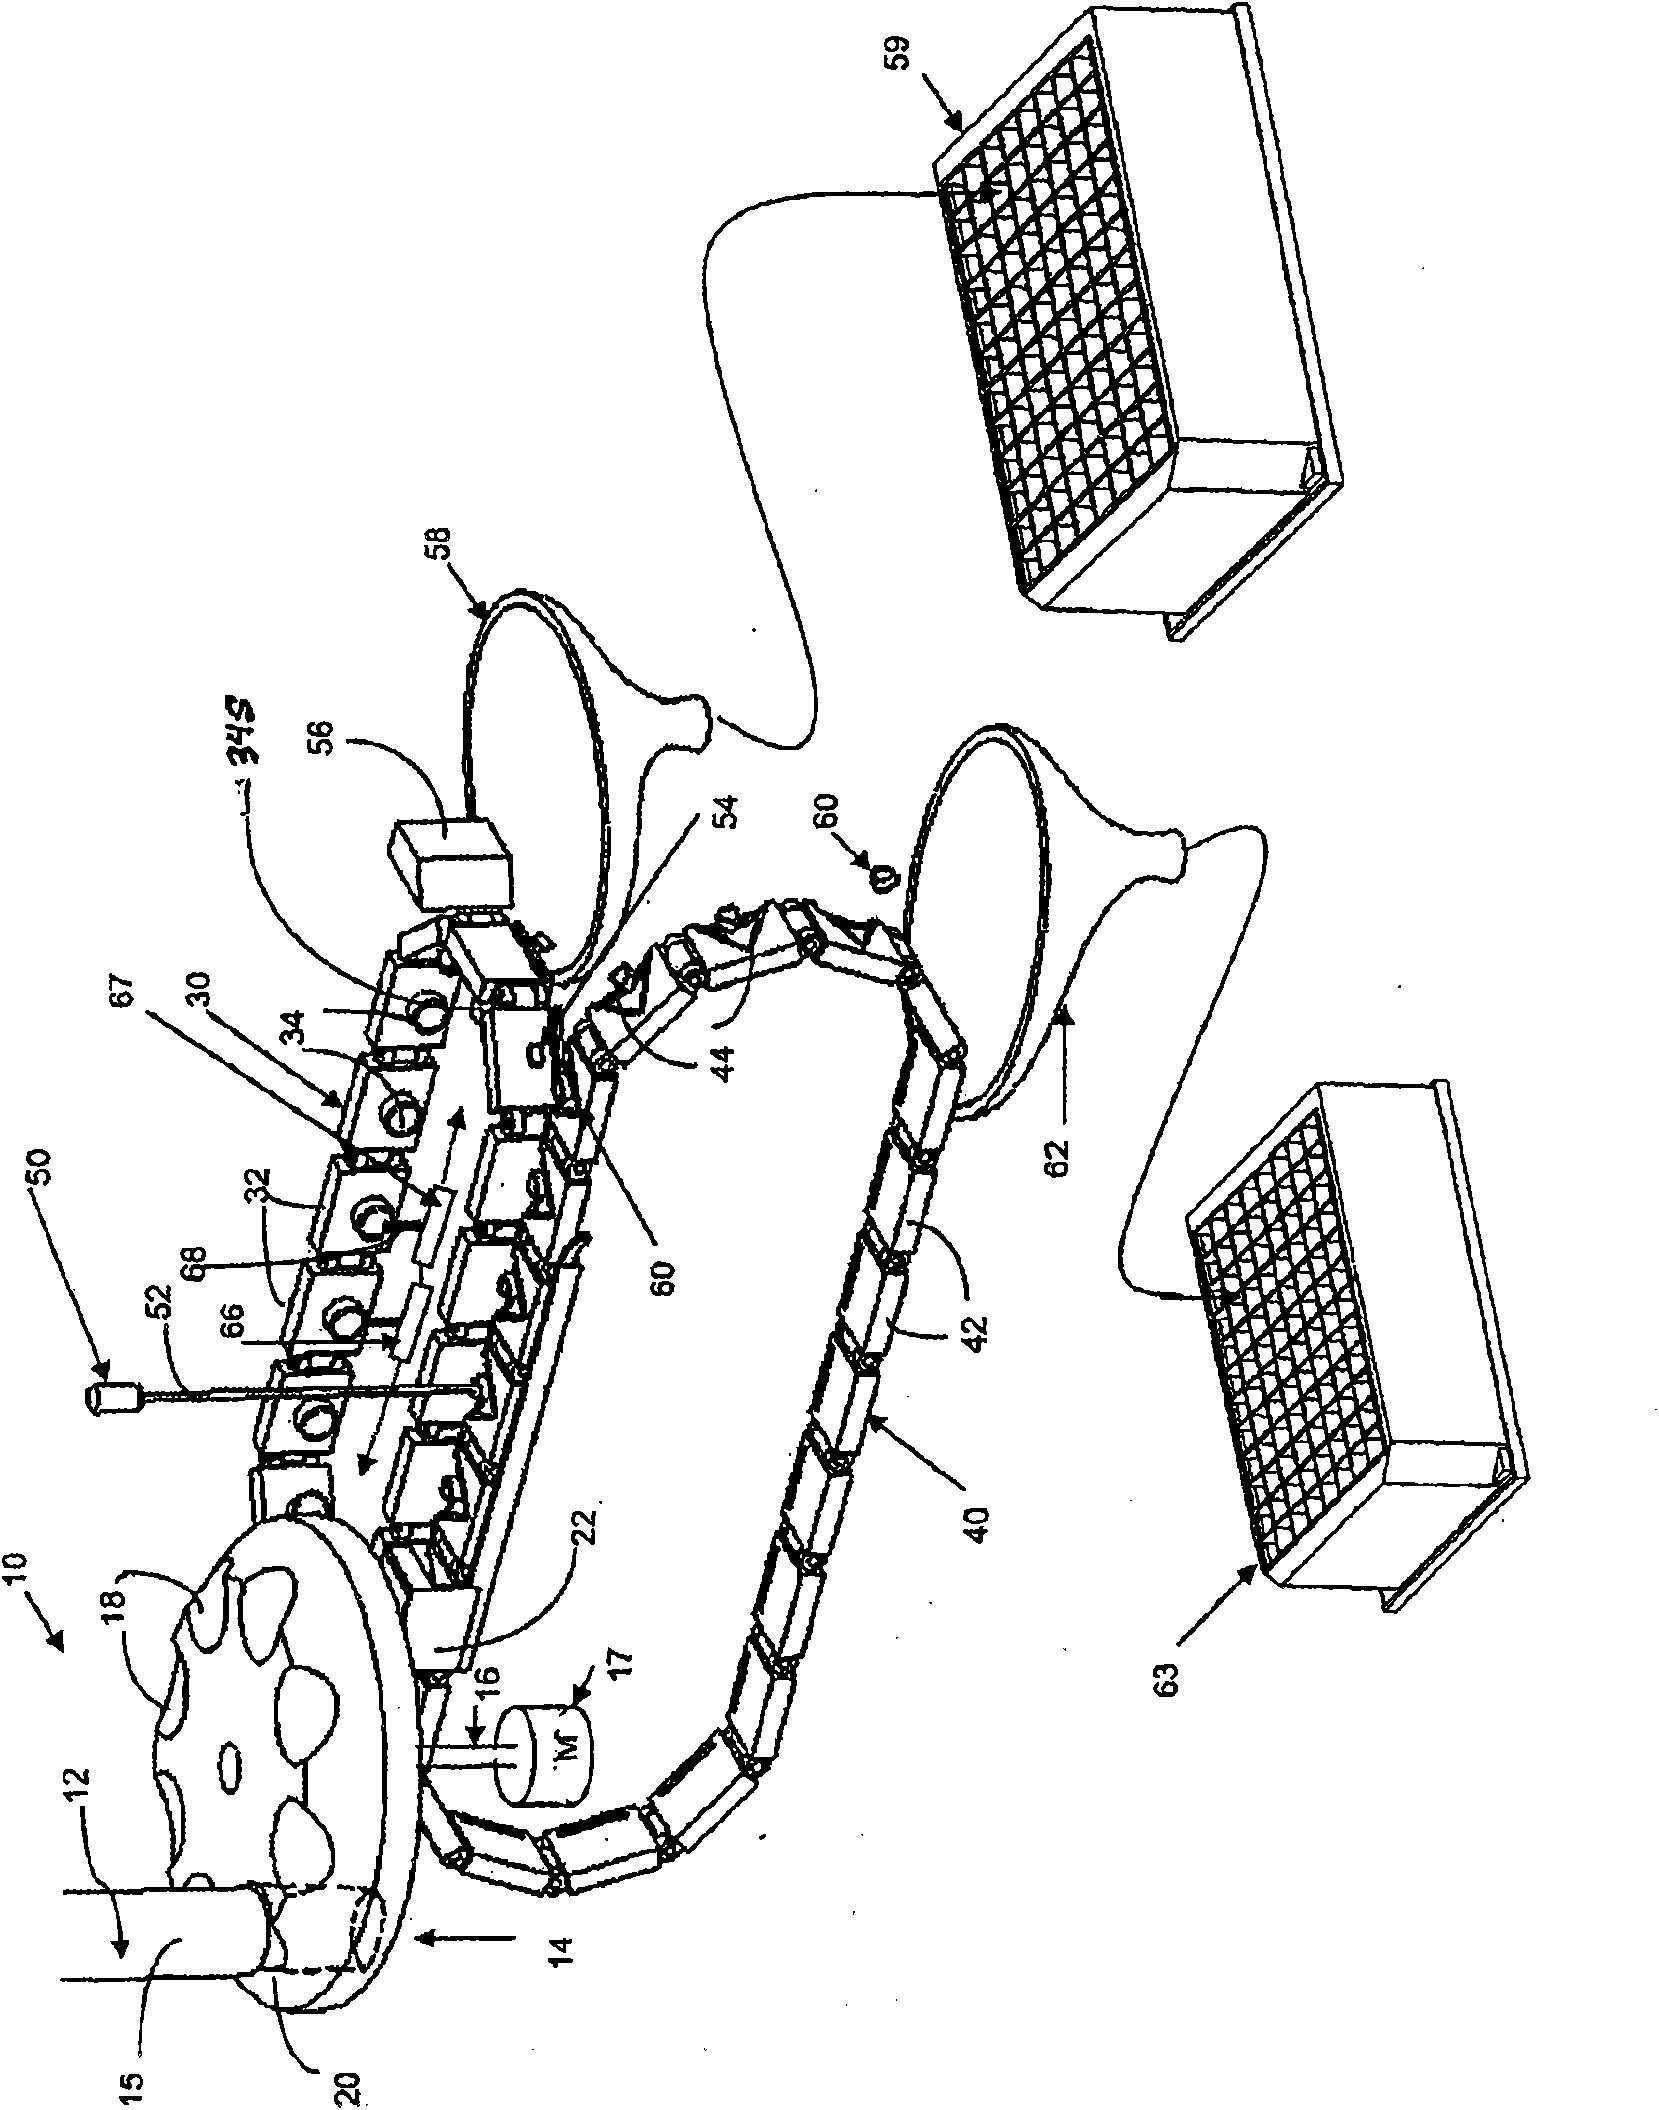 Method and process for orientating, sampling and collecting seed tissues from individual seed